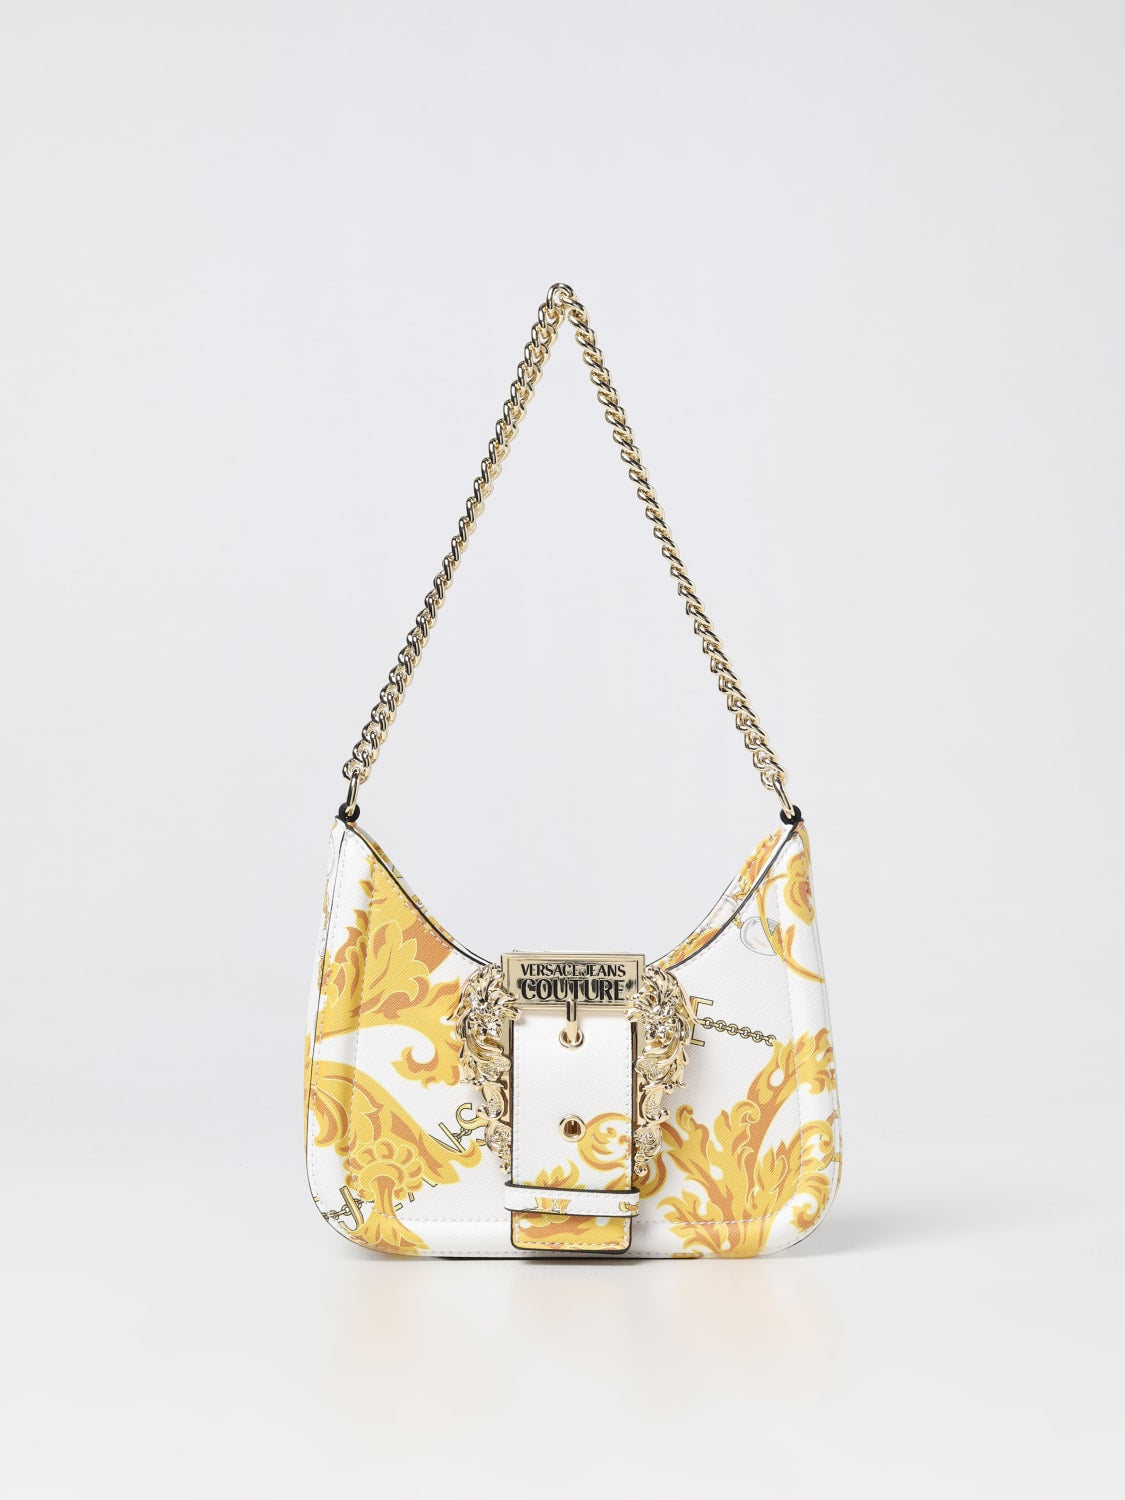 Versace Jeans Couture mini bag for women